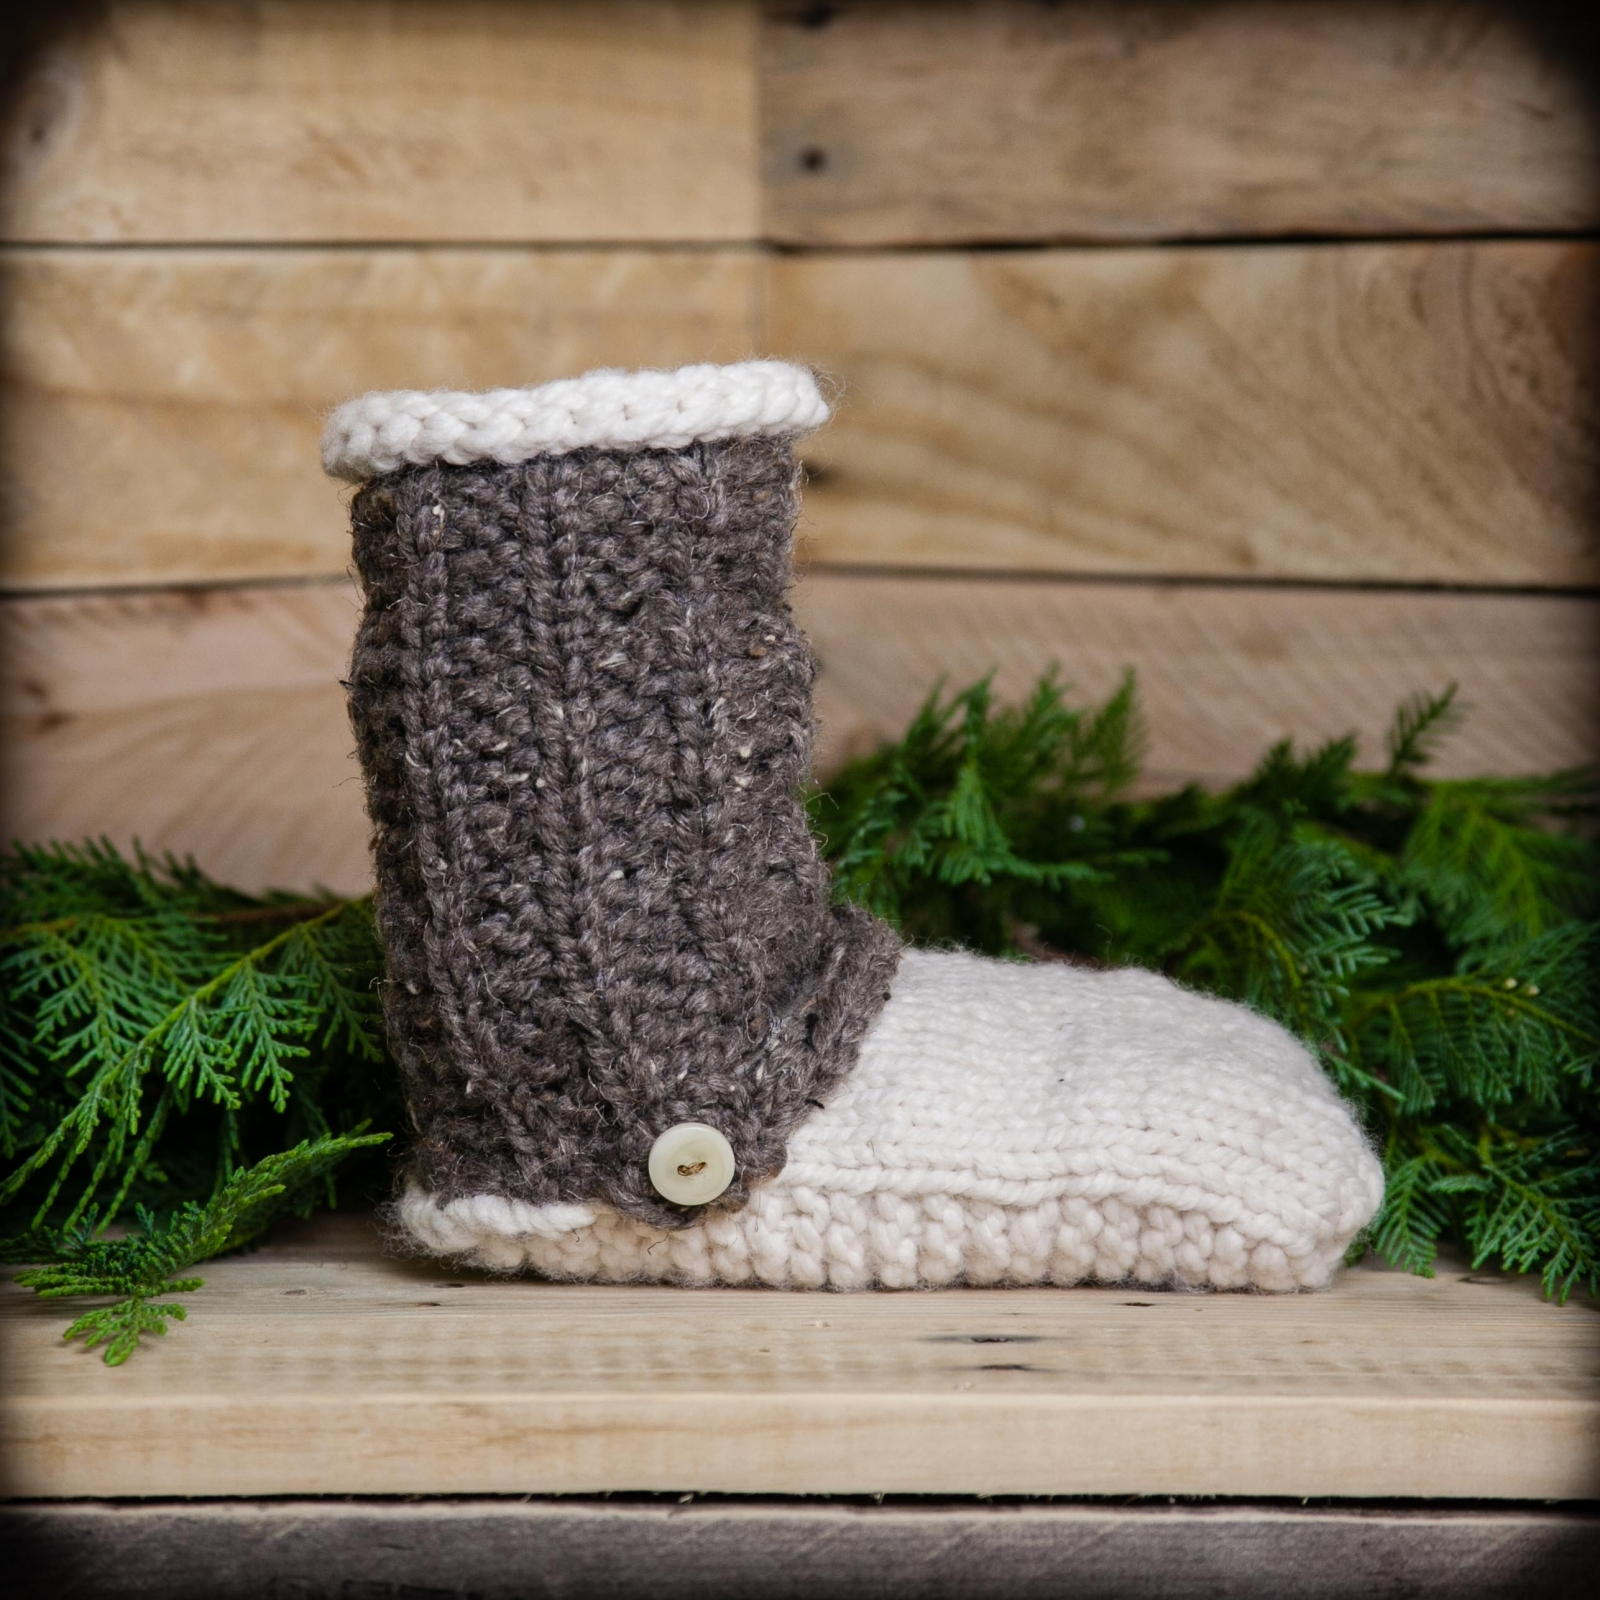 Knitting Patterns For Slipper Boots Loom Knit Slipper Boot Pattern Loom Knit Shoe Men Women Teen Sizes Pdf Pattern Download Unisex